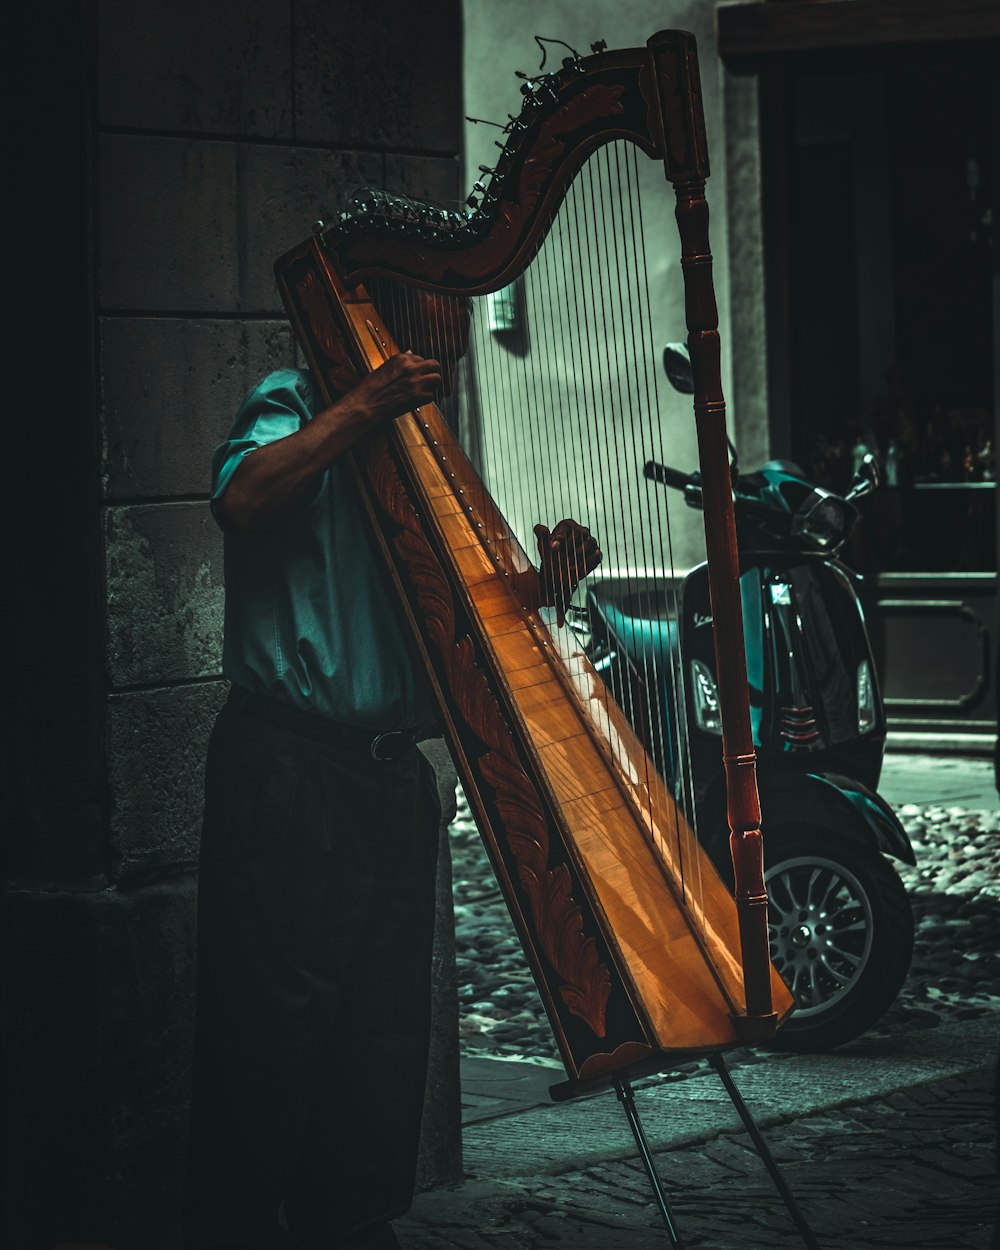 man plays a brown wooden harp